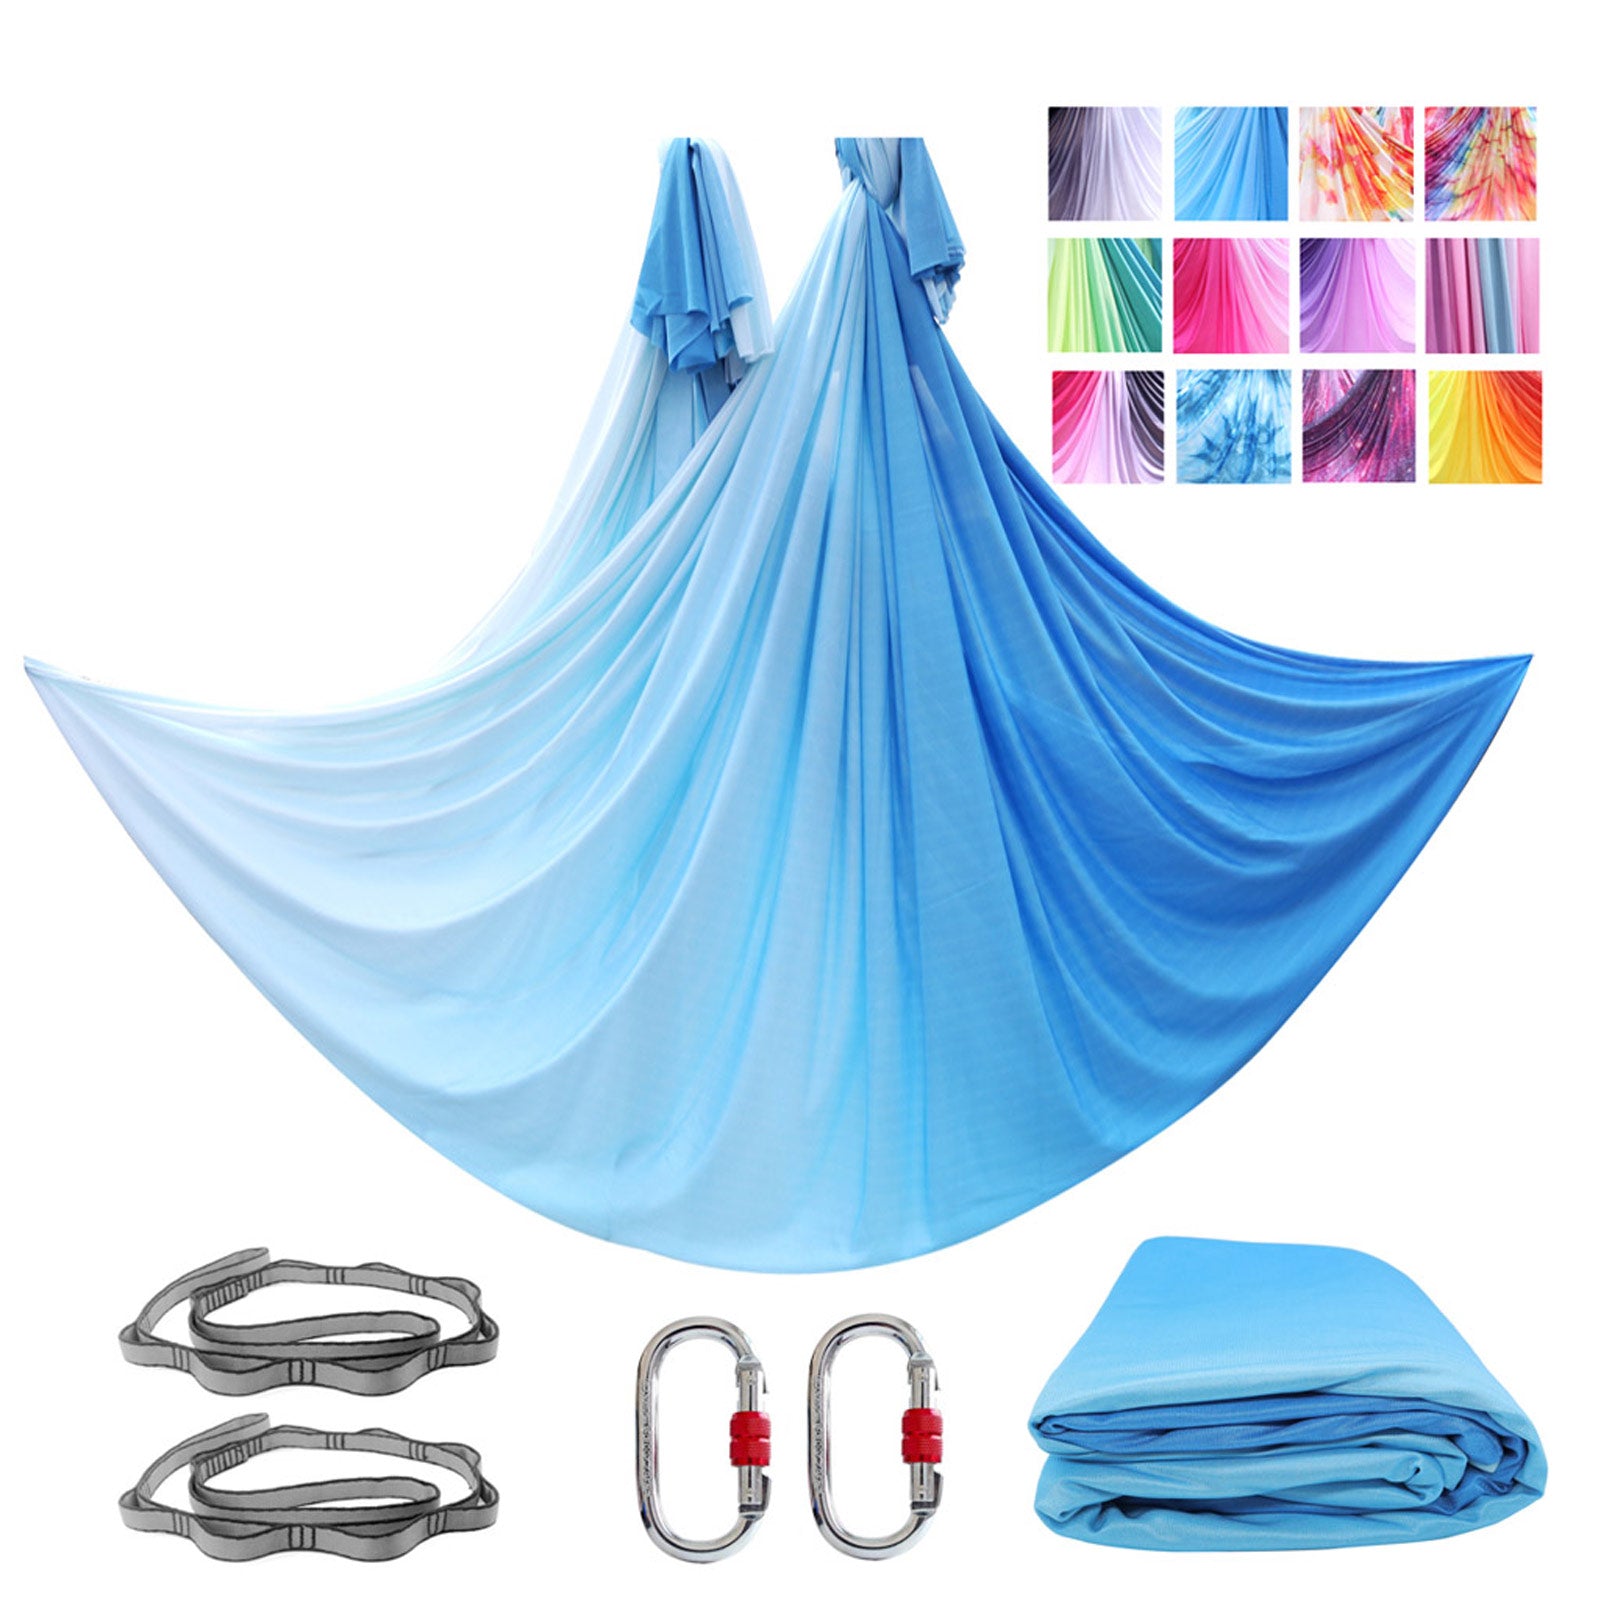  5ft Aerial Yoga Swing Trapeze Hammock Extension Straps for  Fitness Exercise, Multi-Loop Climber Strength Daisy Chains Include 2 Safty  Carabiners : Sports & Outdoors